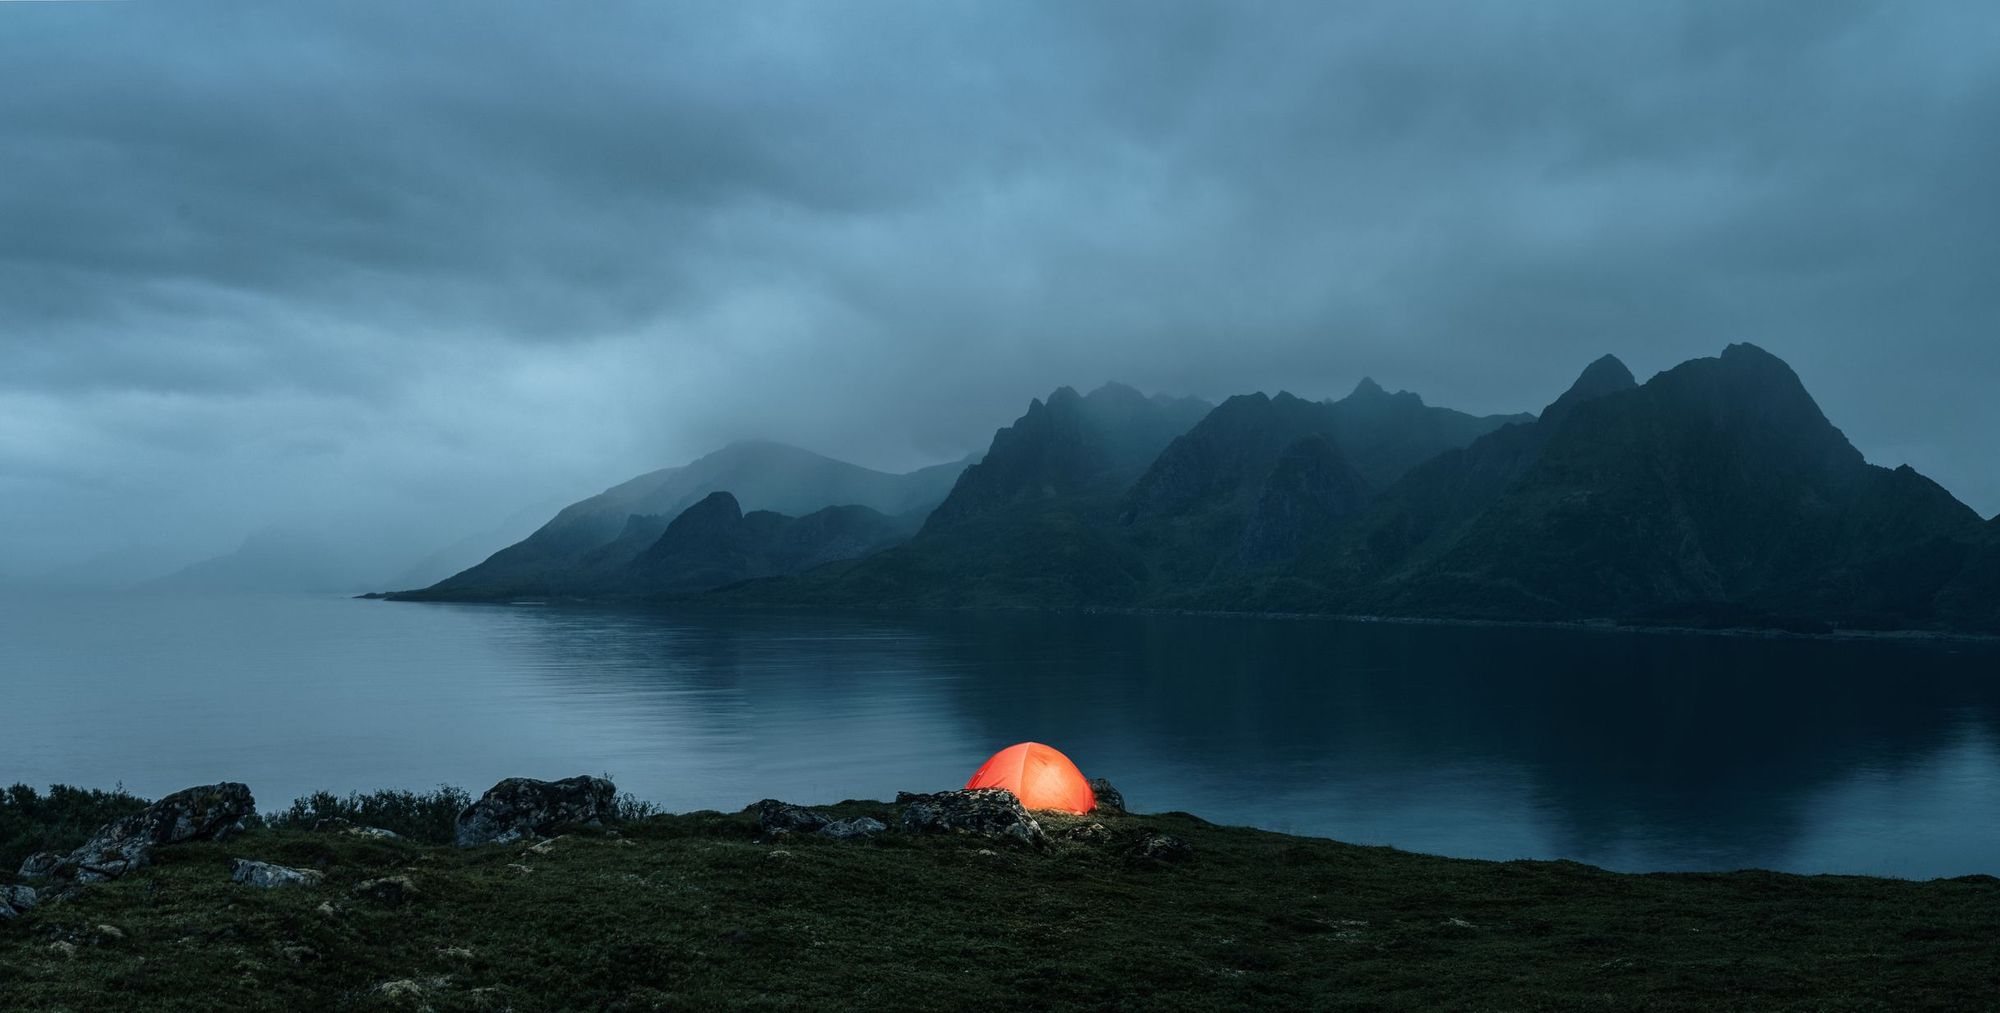 A tent lit from within, surrounded by a cloudy landscape on the Lofoten Islands, Norway.